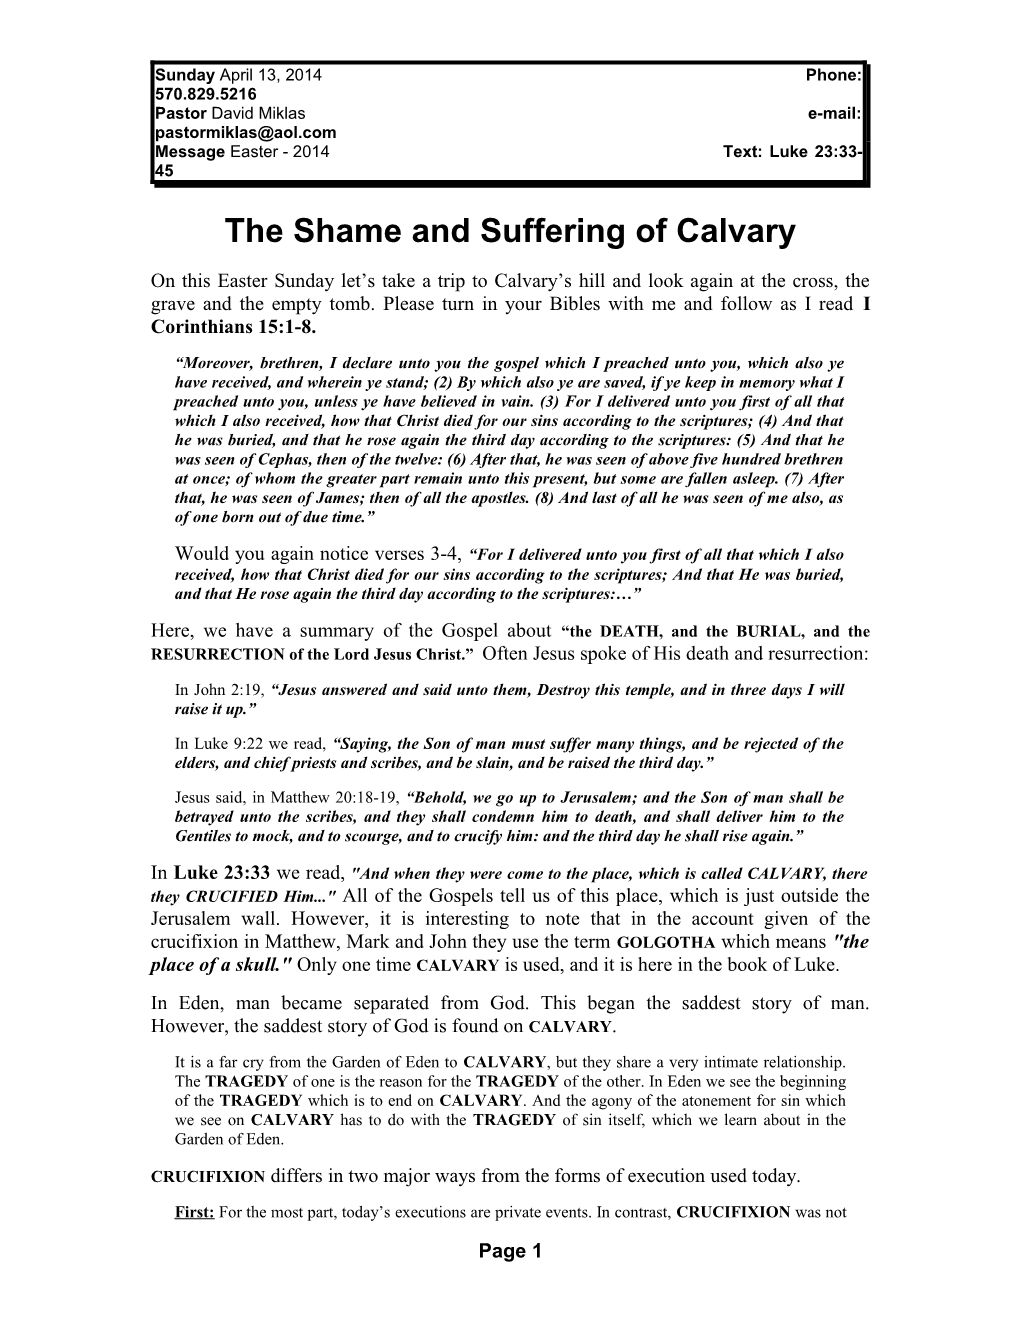 The Shame and Suffering of Calvary